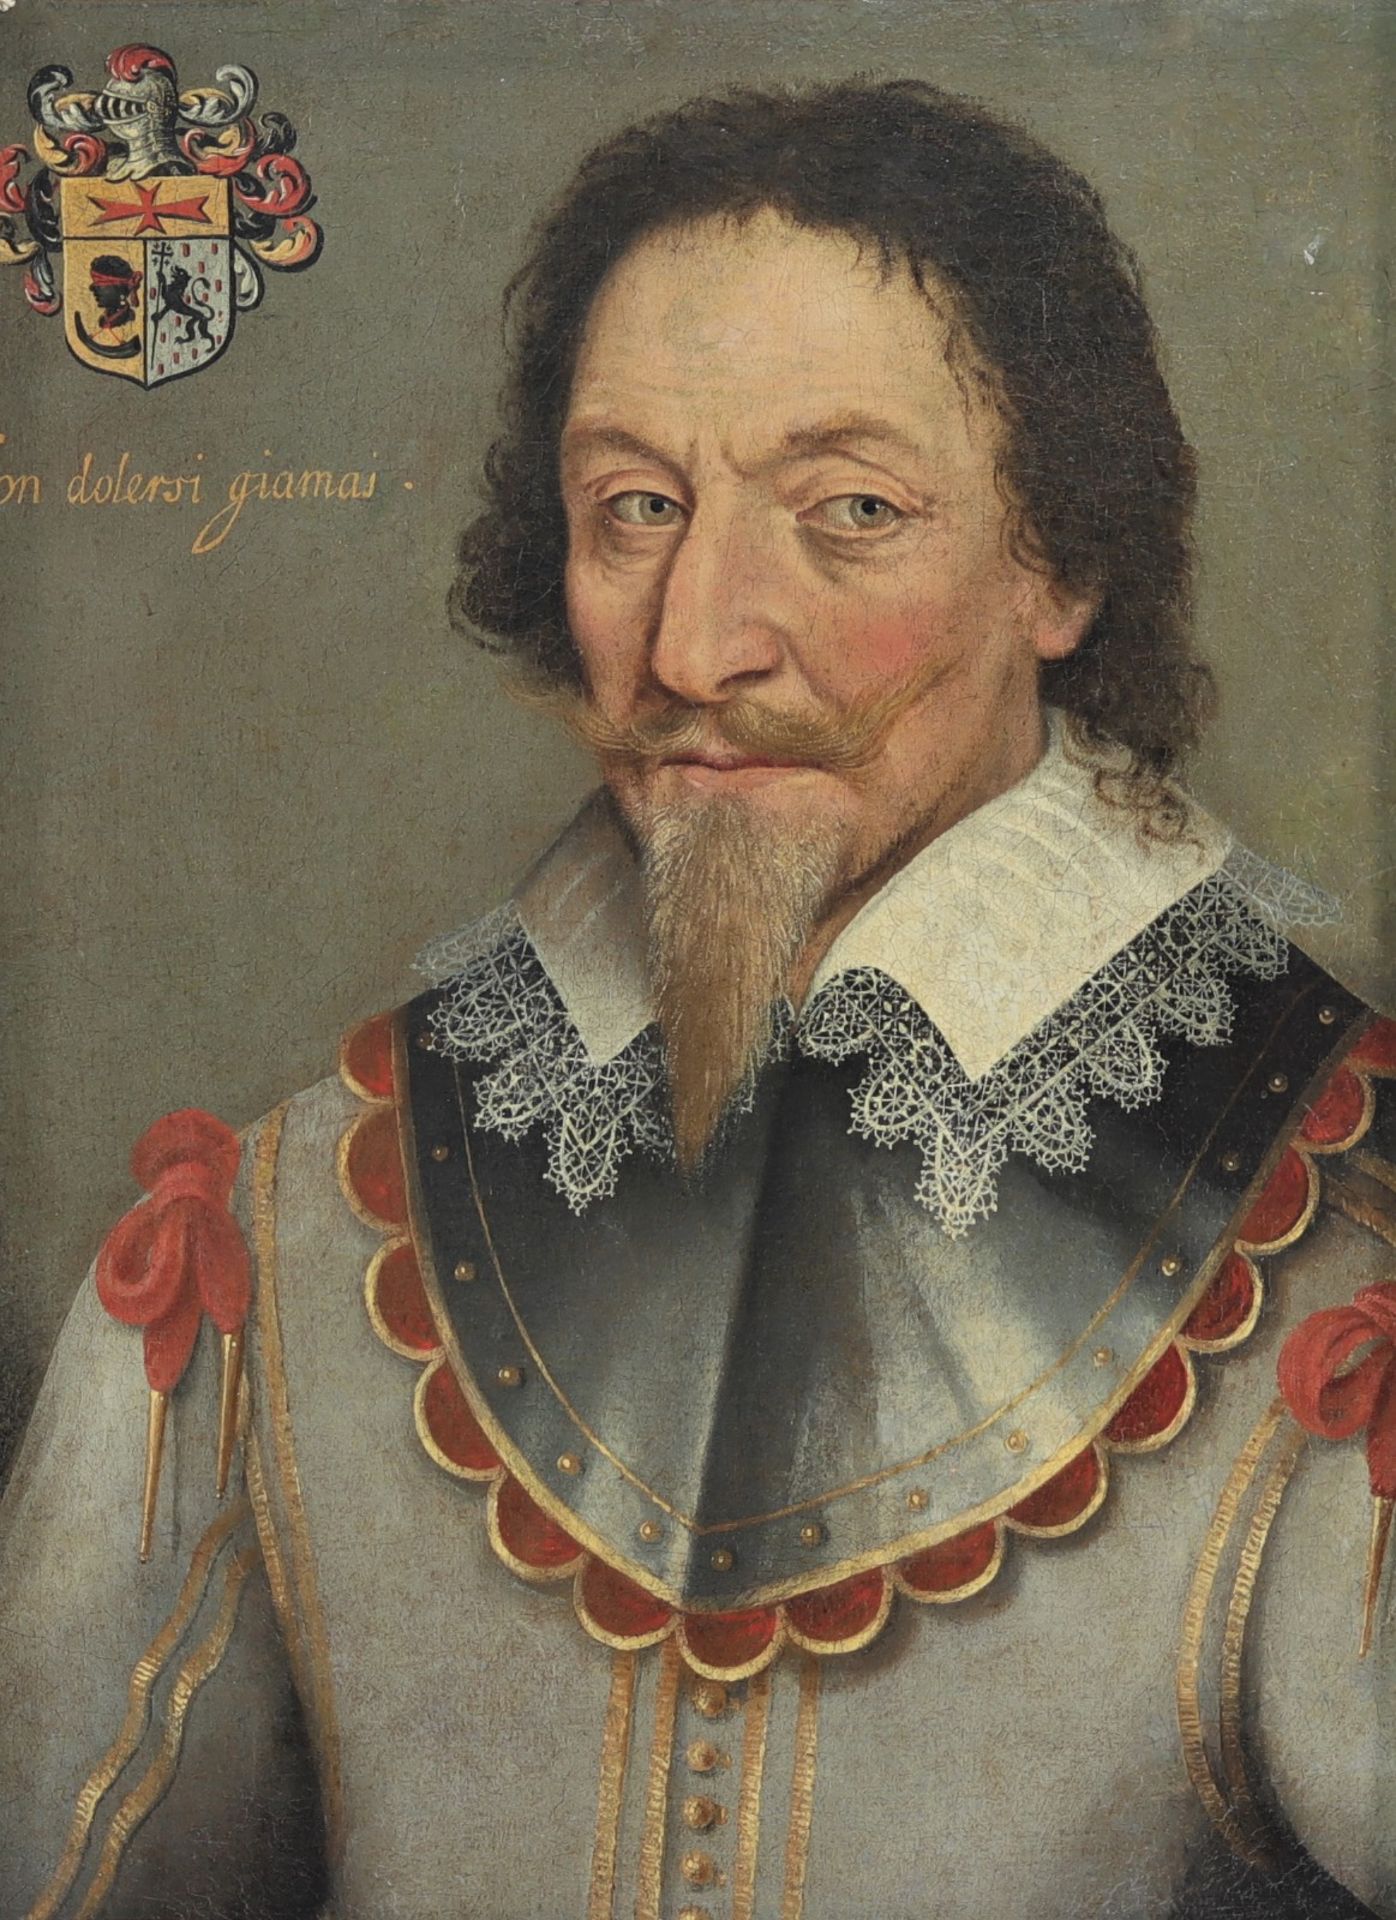 Portrait from Louis XIII period of the 17th century of a Corsican Nobleman from the Antwerp school